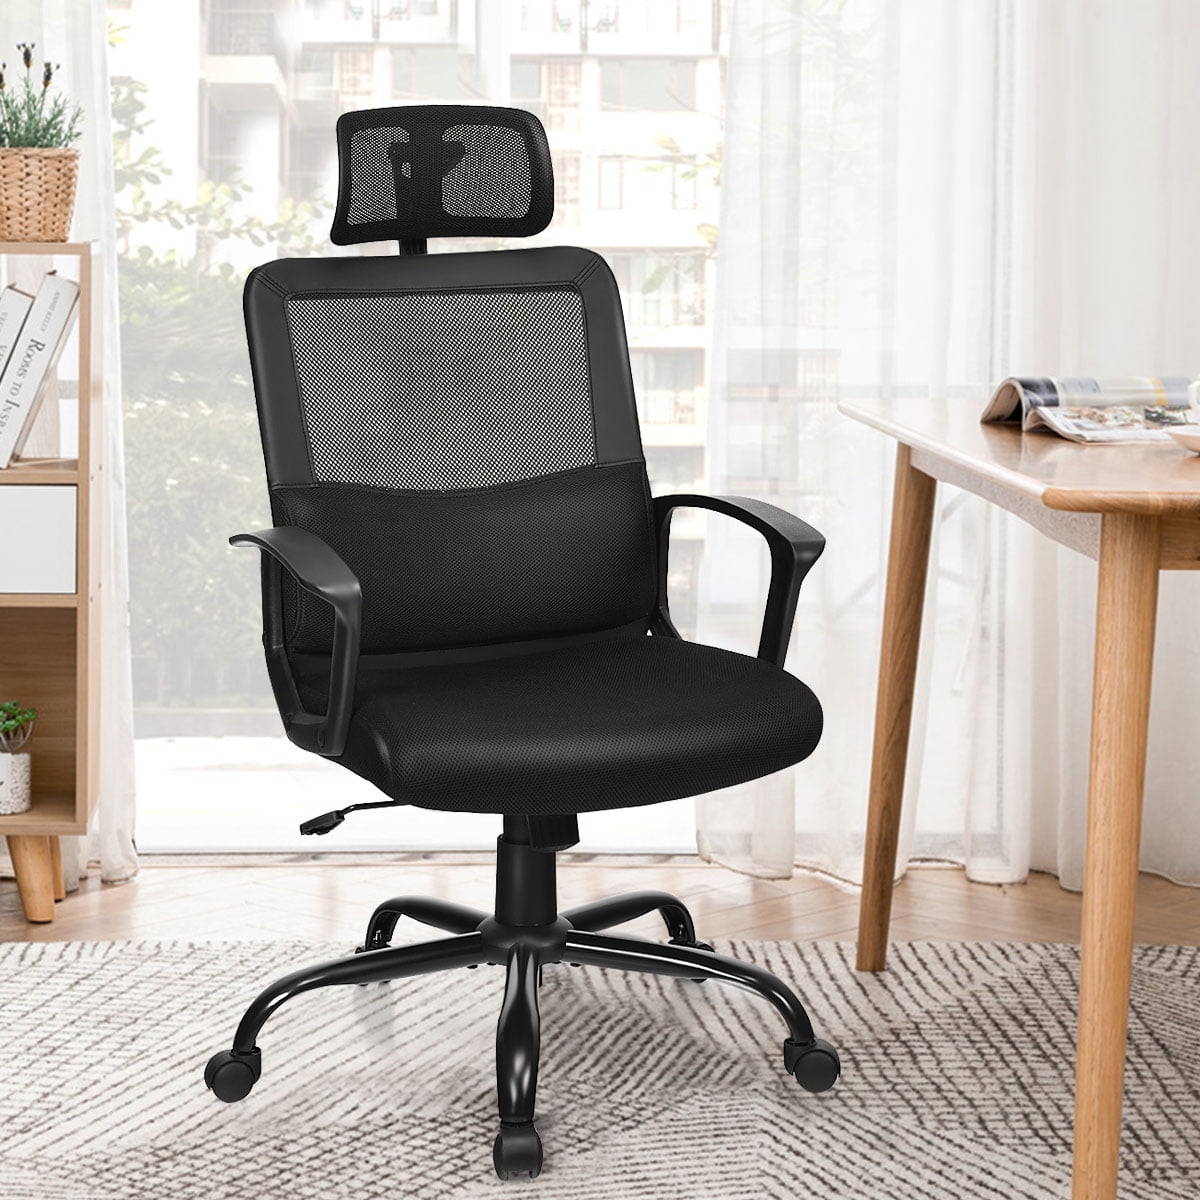 Executive Office Mesh Chair Adjustable Comfy Padded Soft Seat Swivel High Back 